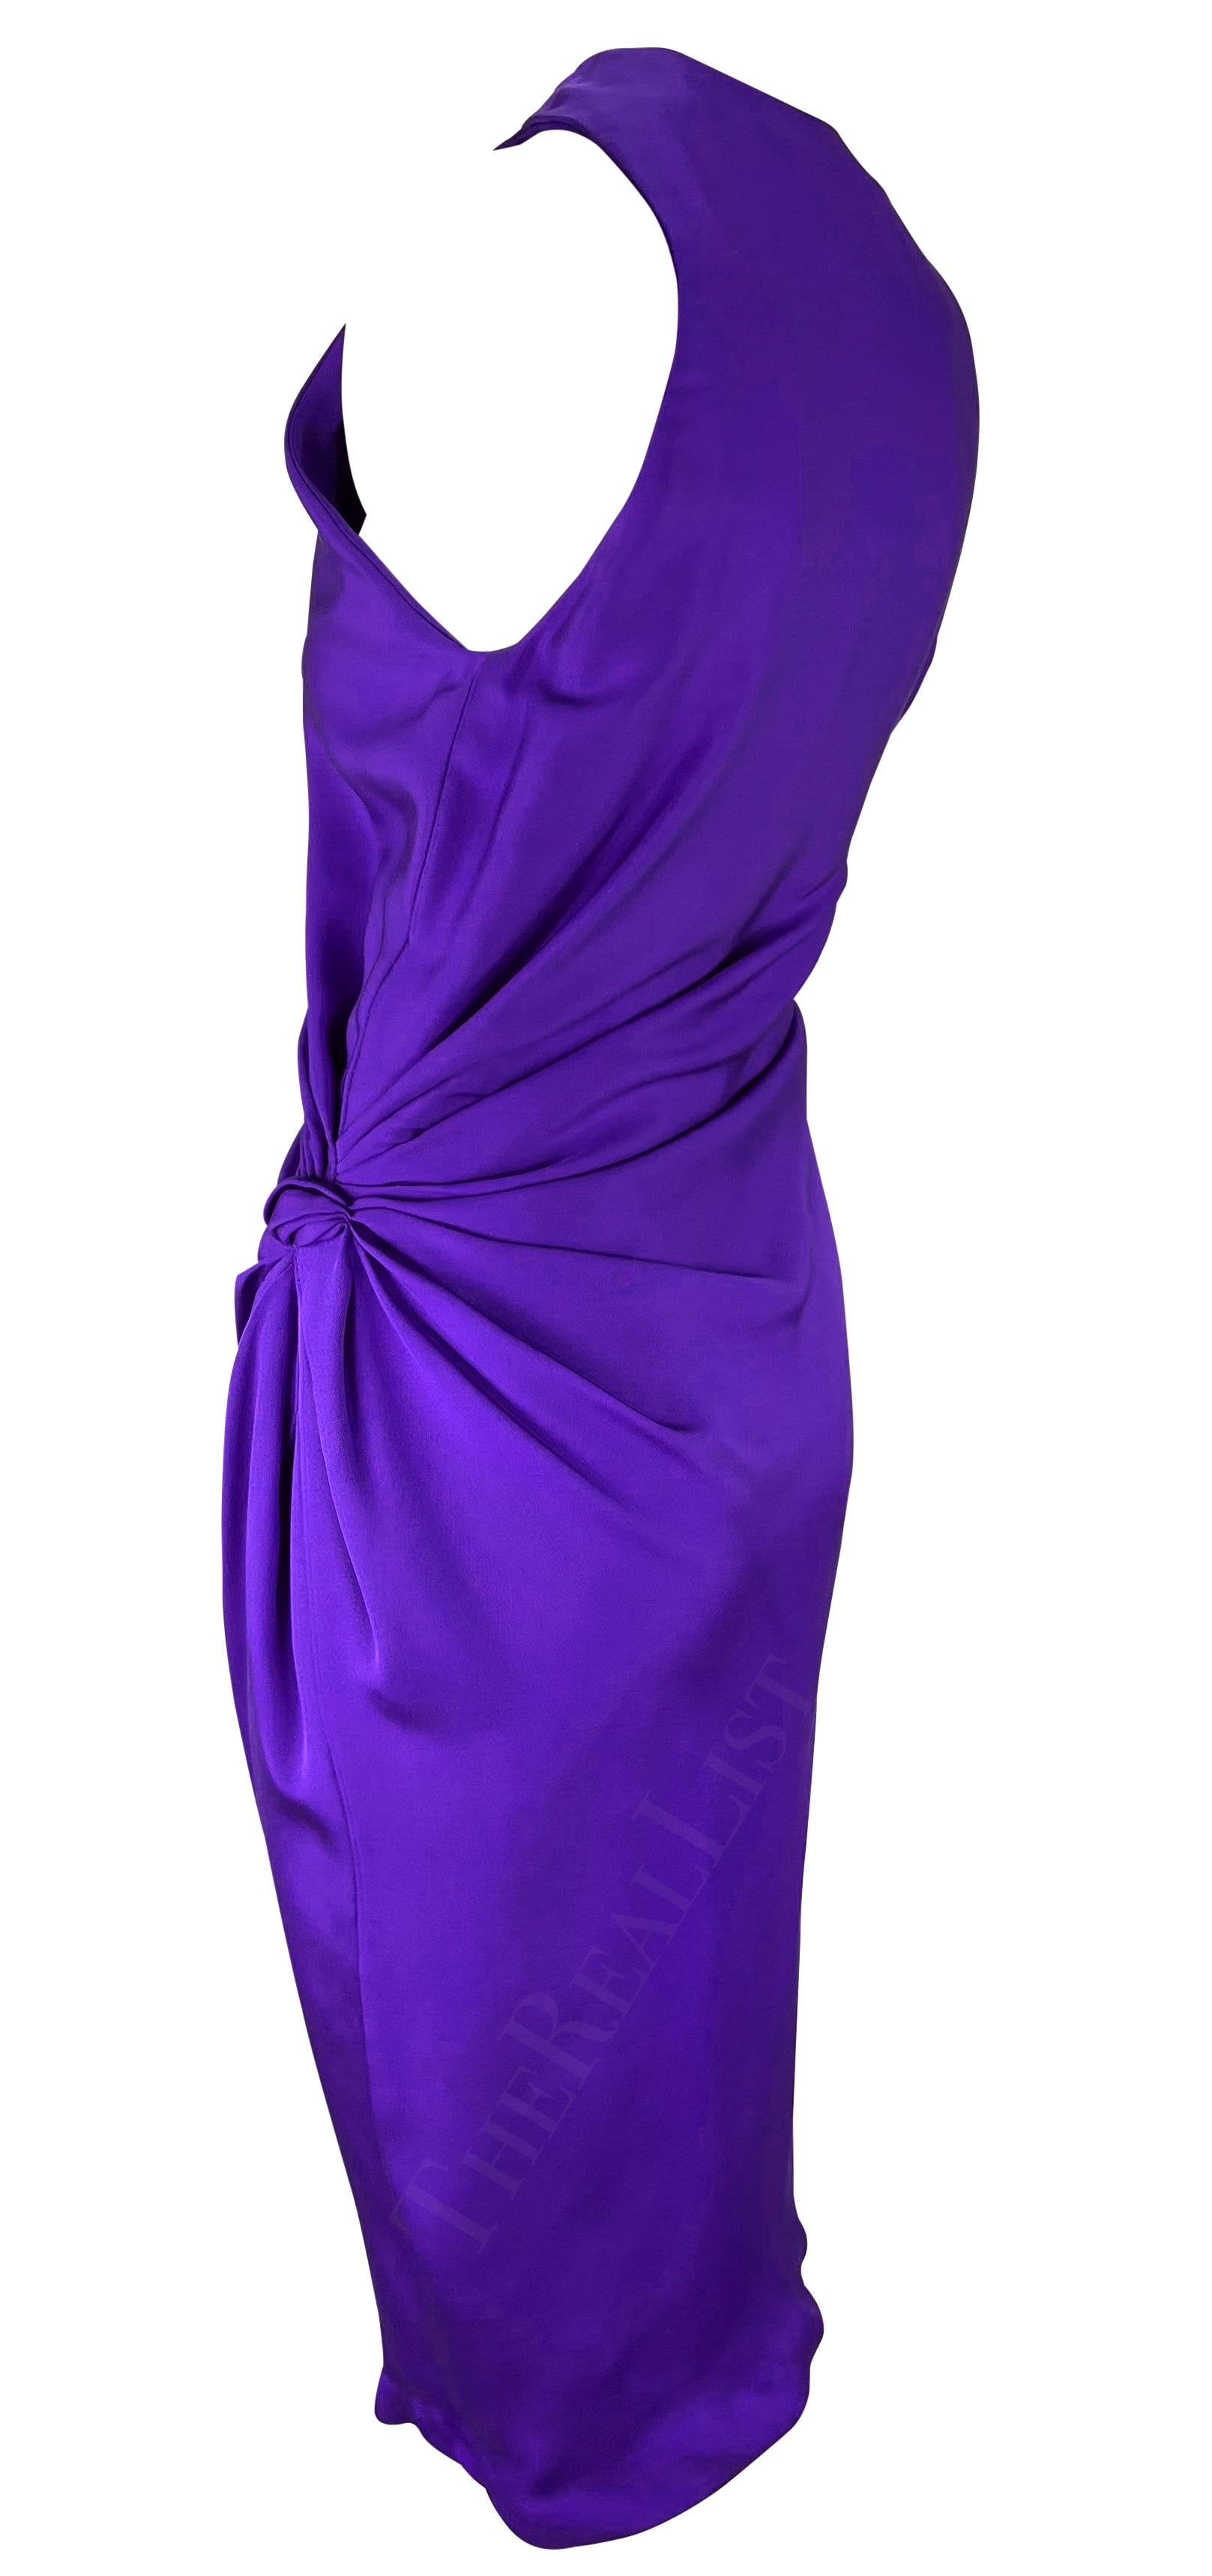 S/S 1991 Gianni Versace Purple Gathered Ruched Sleeveless Cocktail Dress Unisexe en vente